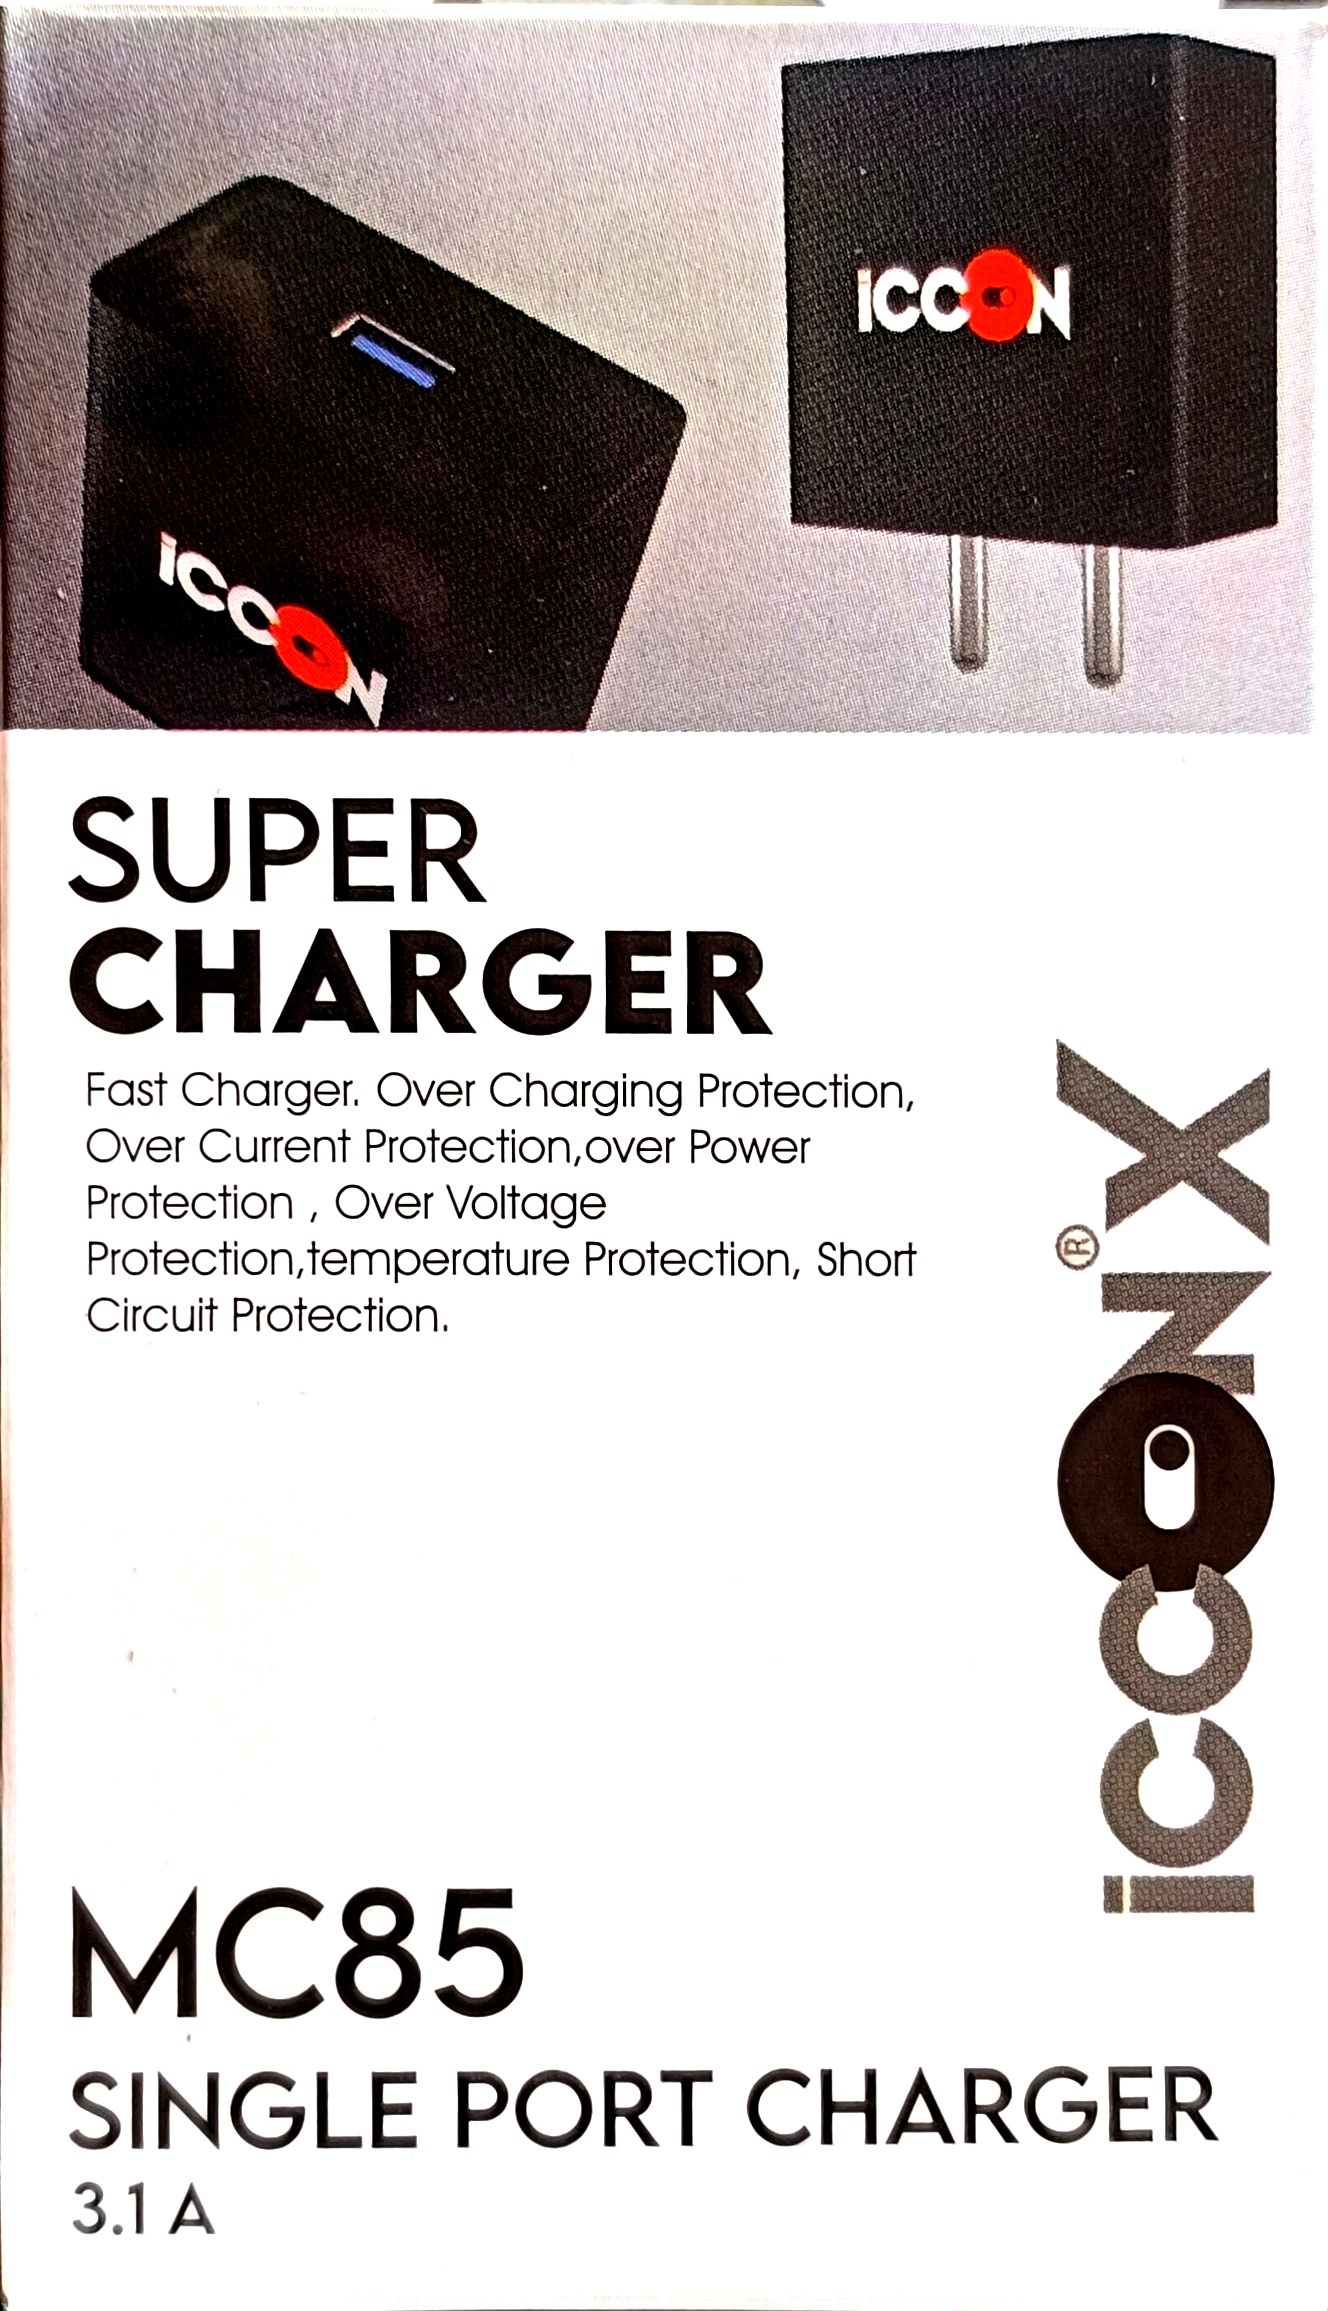 IcoonX 15 Watts (3.1 Amp) Charger Set Best Built Quality